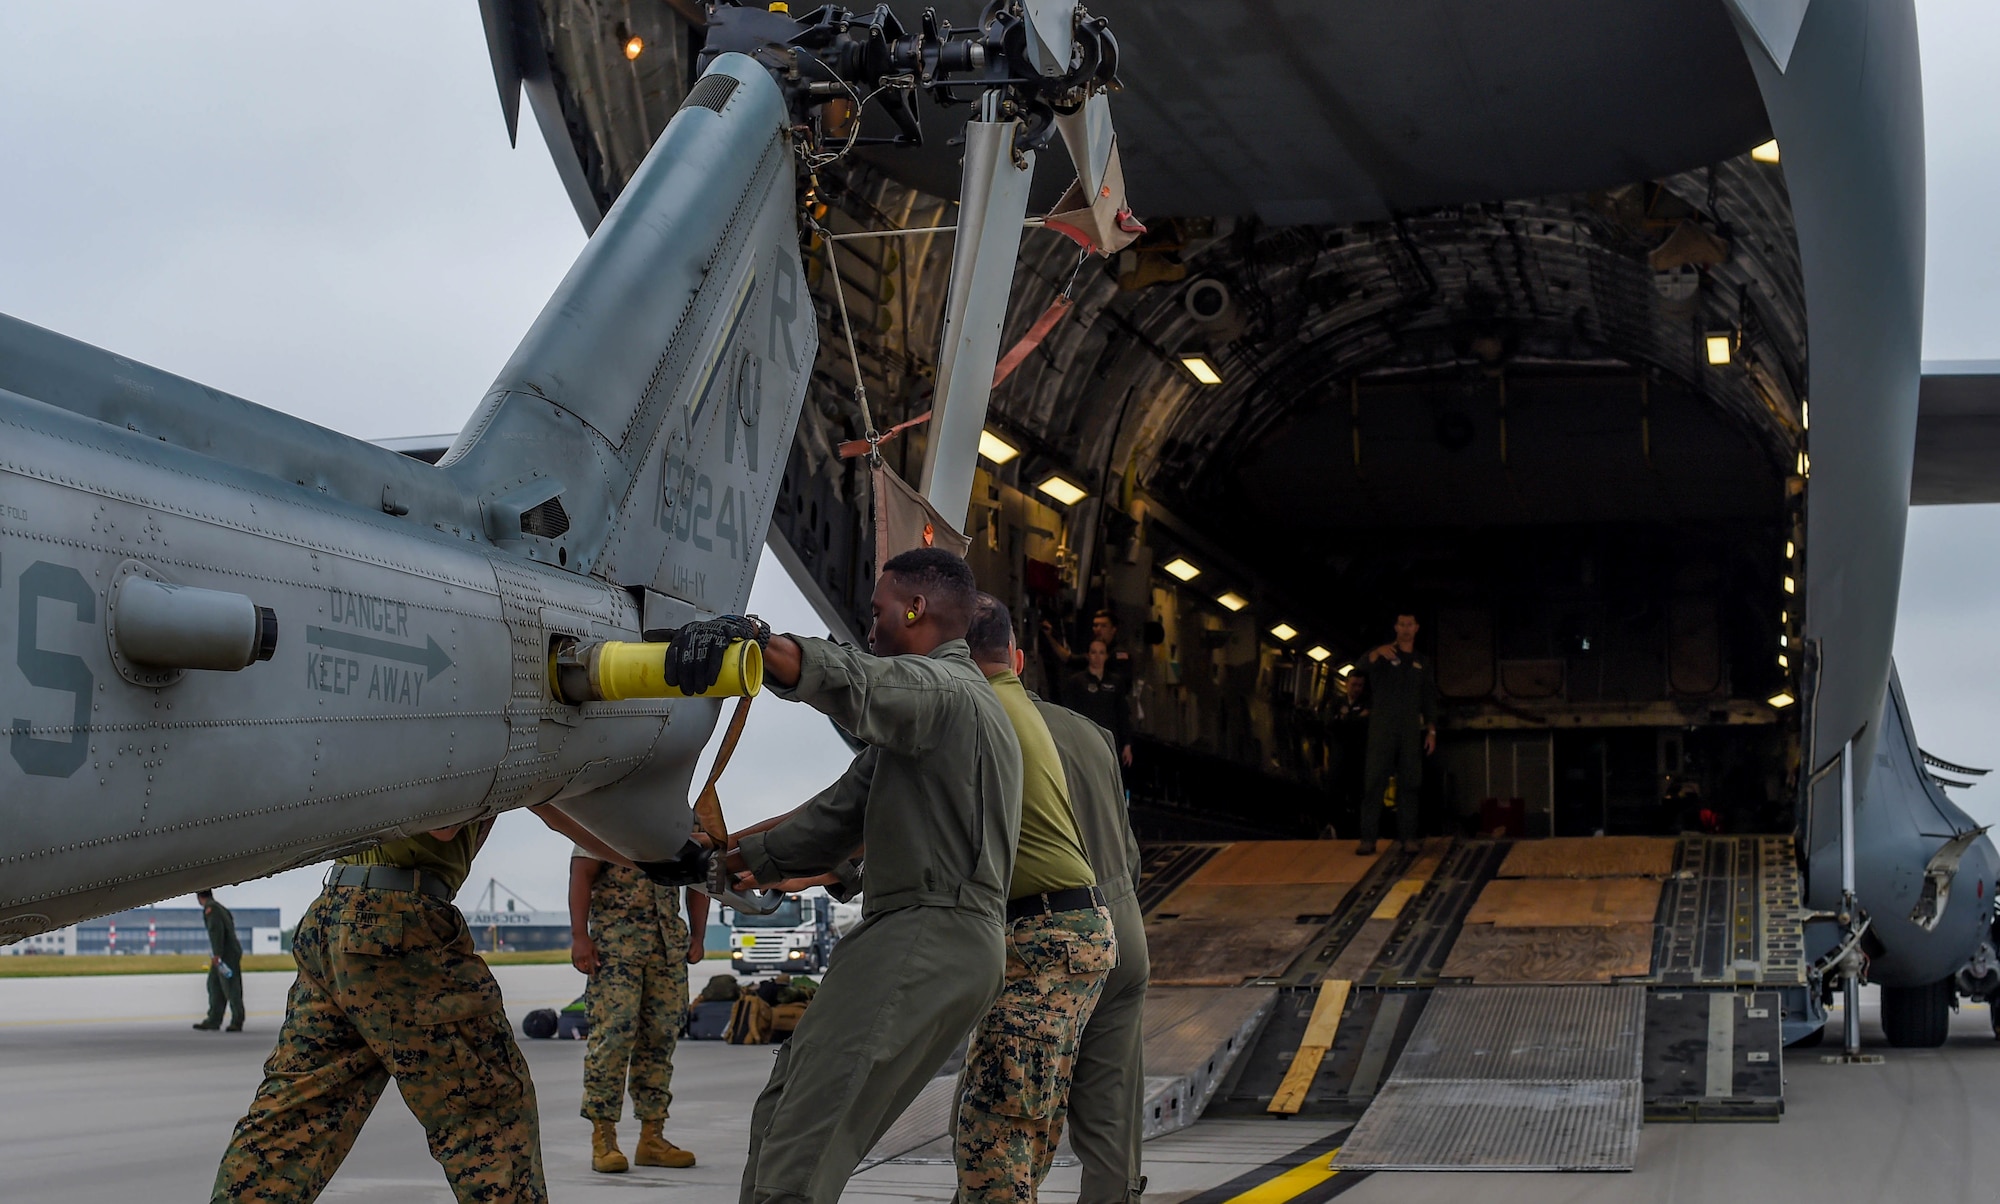 U.S. Marine Corps Marines load a UH-1Y Venom onto a U.S. Air Force C-17 Globemaster III at Václav Havel Airport Prague, Czech Republic, Sept. 14, 2018. Nelson and other 4th AS Airmen transported the helicopter and ten Marines to the Czech Republic to participate in the NATO Days Air Show. (U.S. Air Force photo by Senior Airman Tryphena Mayhugh)